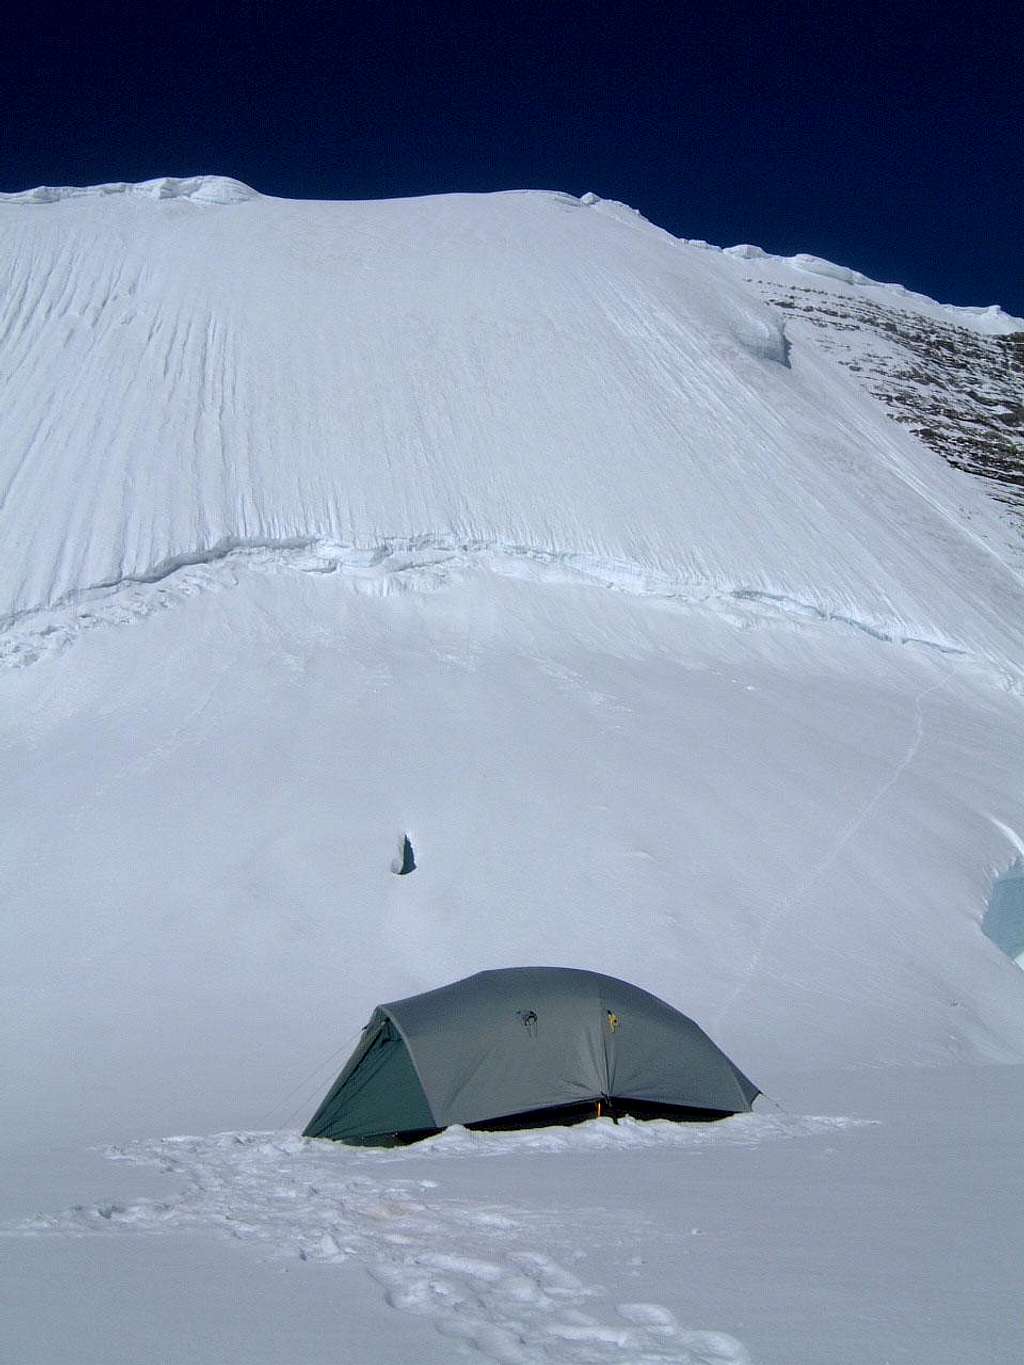 High camp on the Dome at the base of the Kain Face